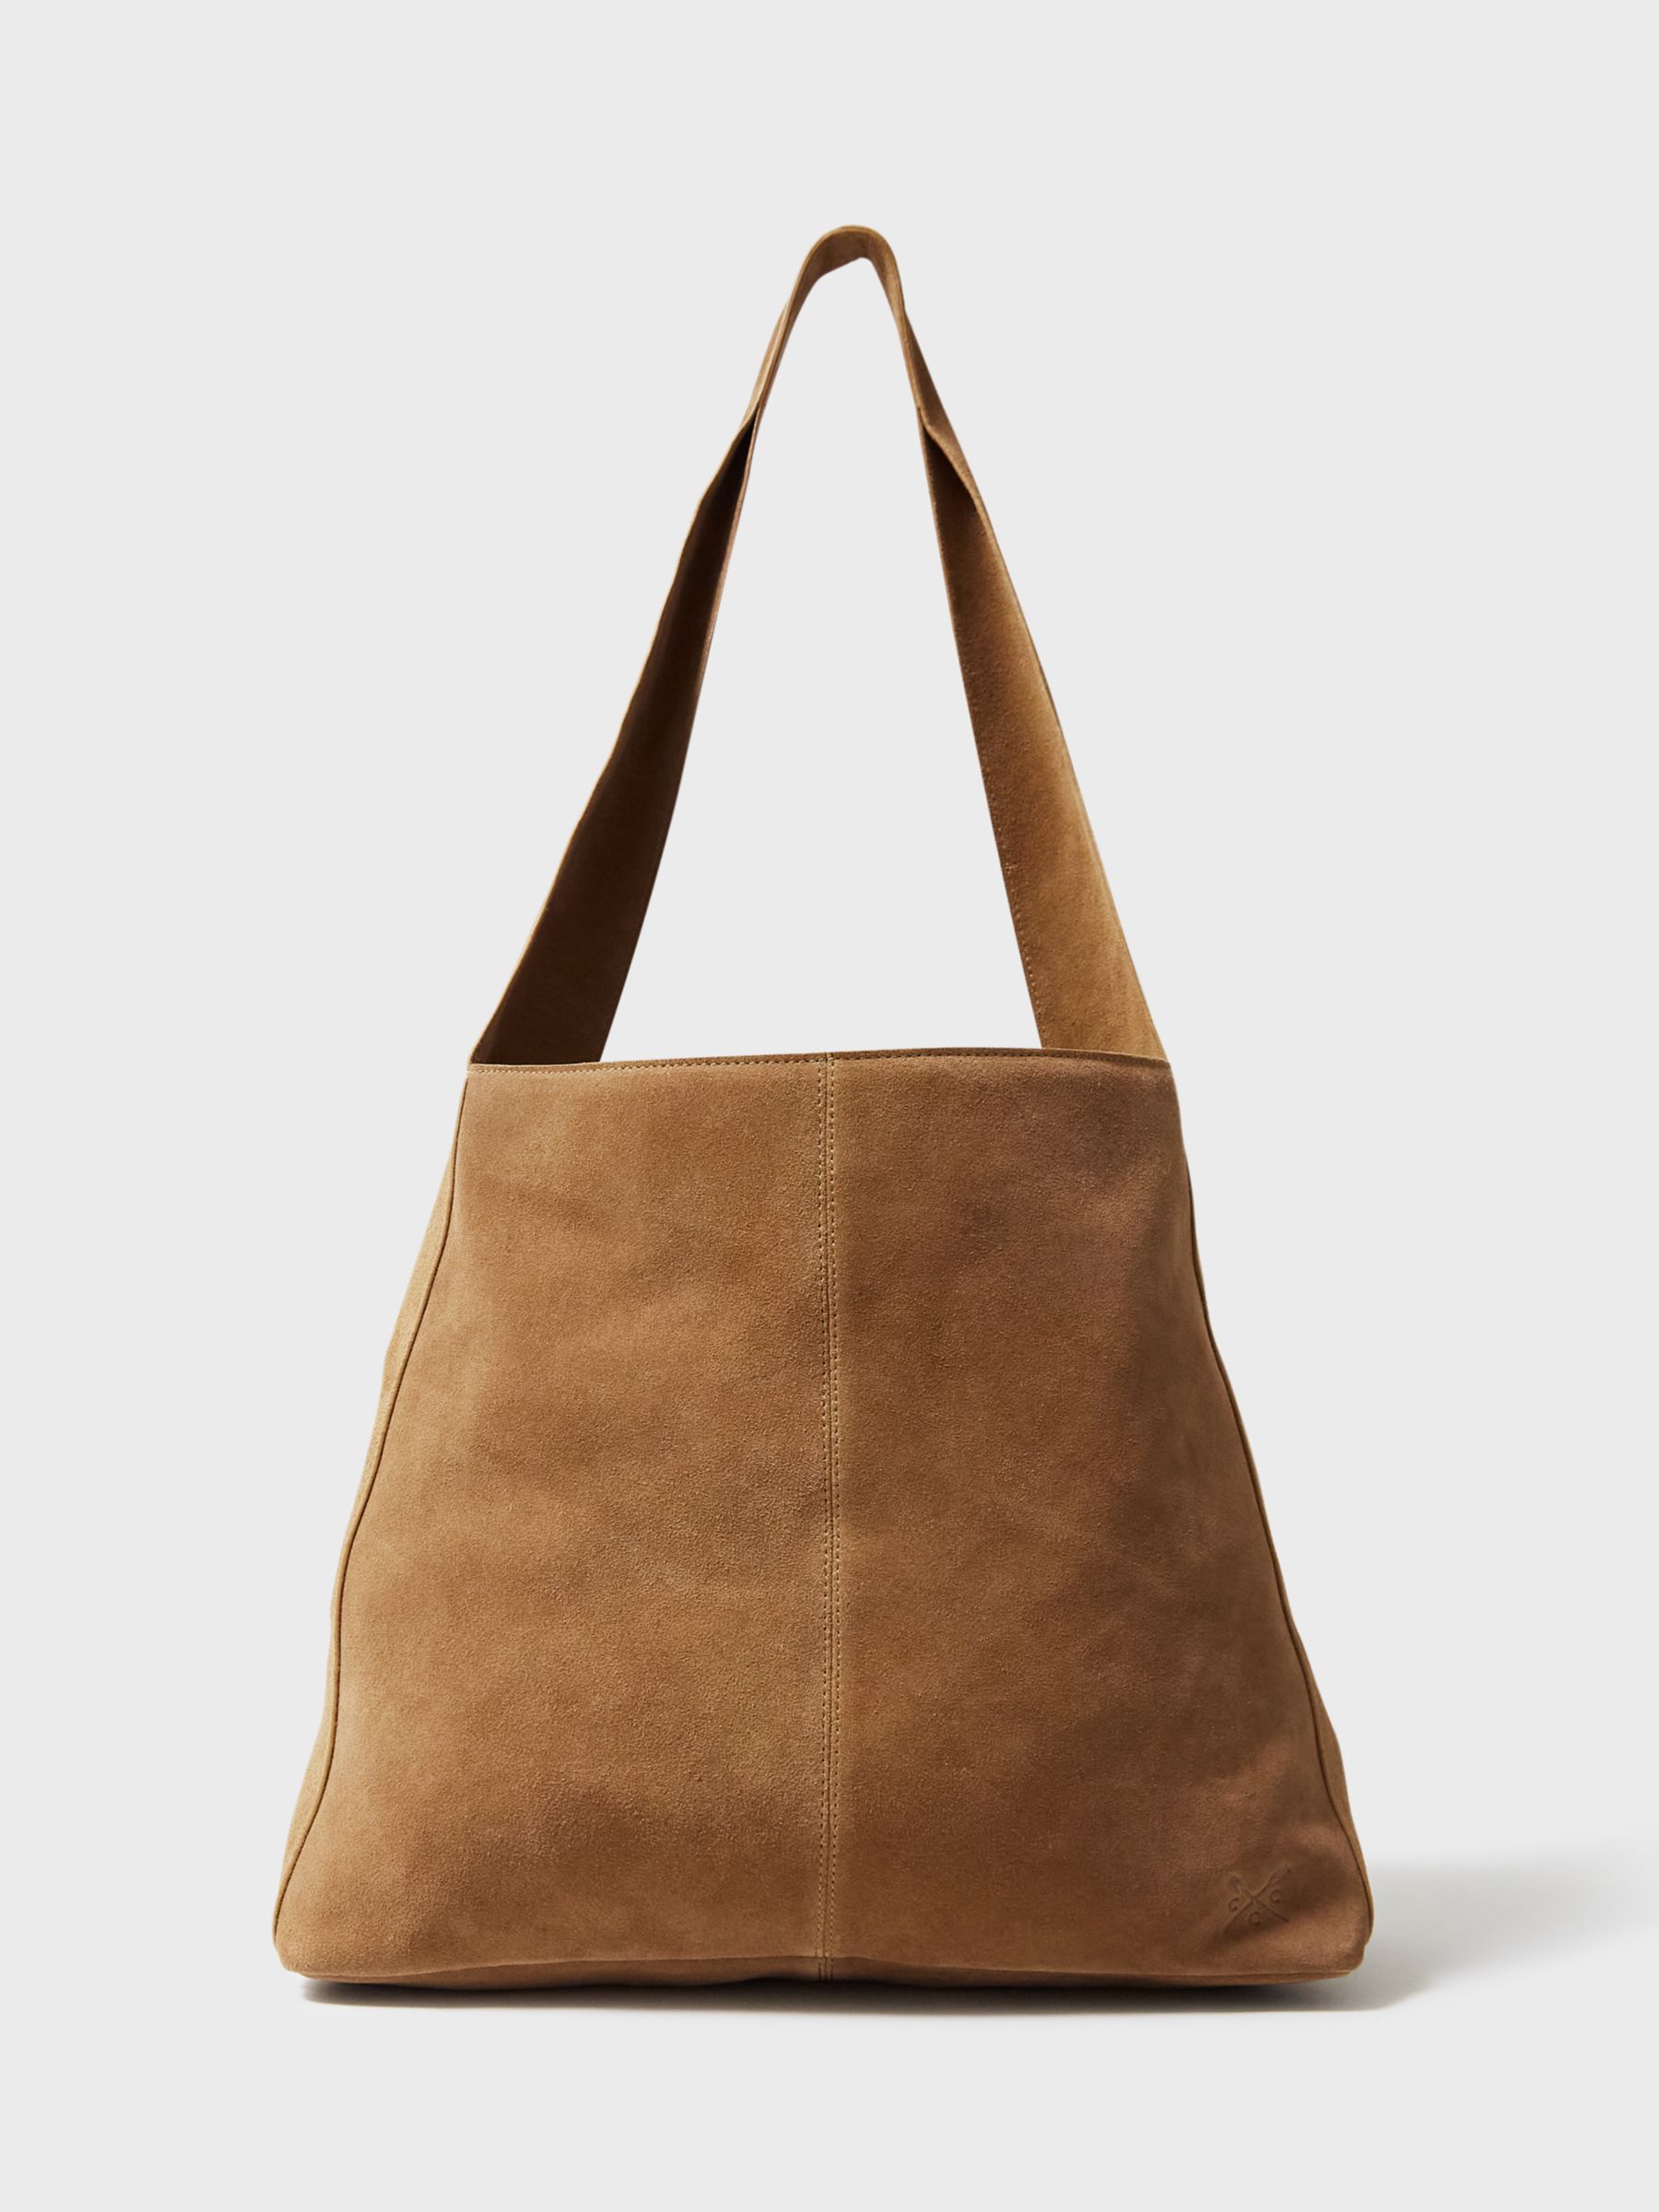 Crew Clothing Hobo Leather Tote Bag, Tan, One Size